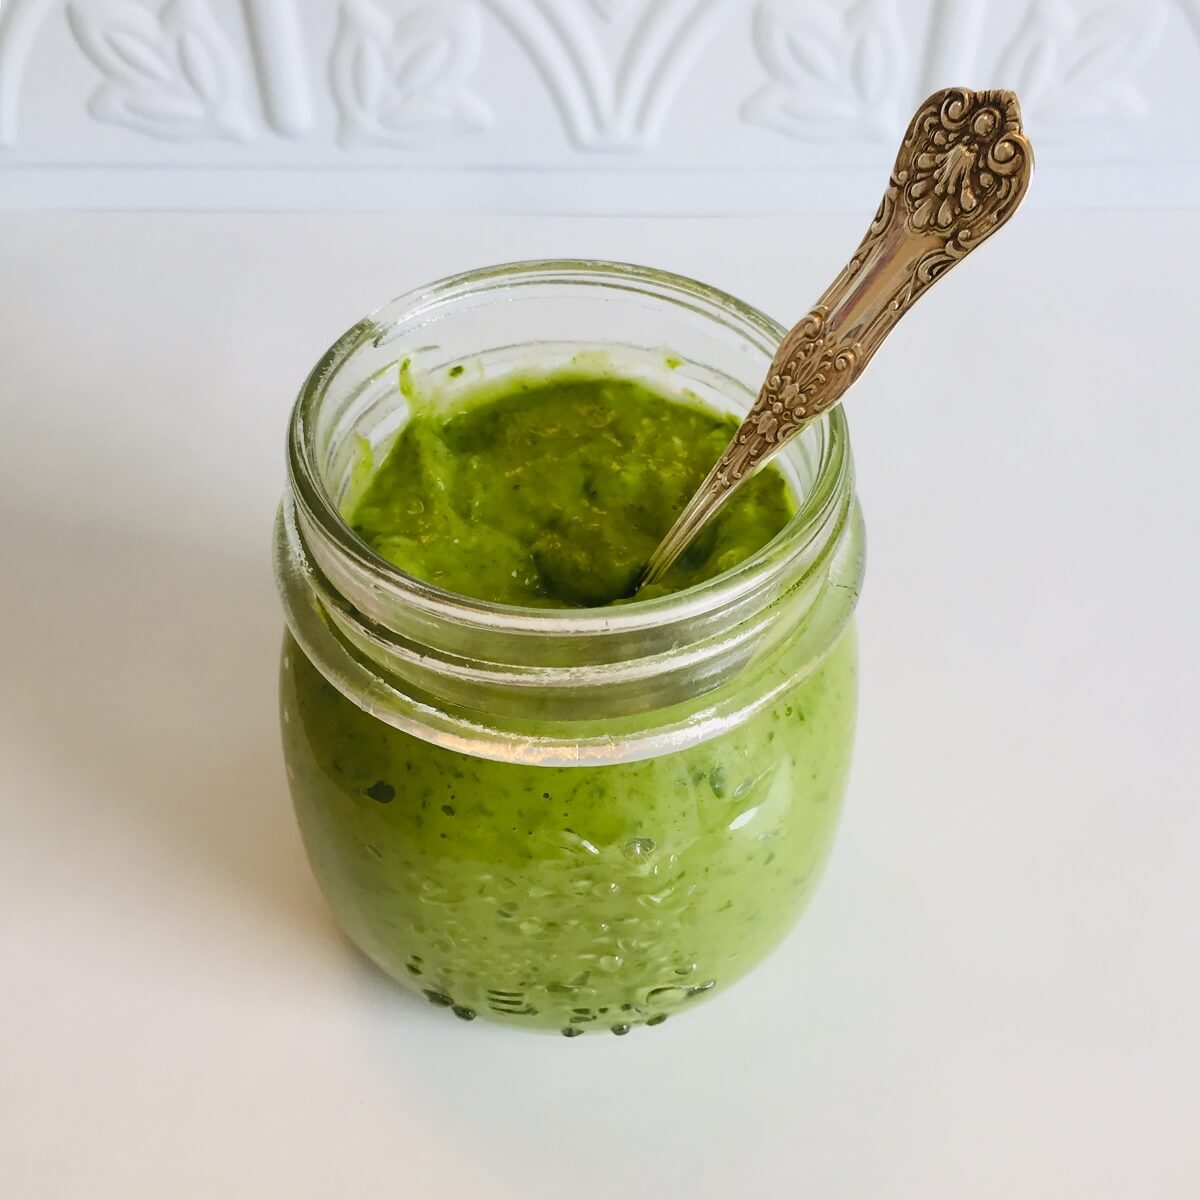 Thick green salad dressing in a jar with a spoon.